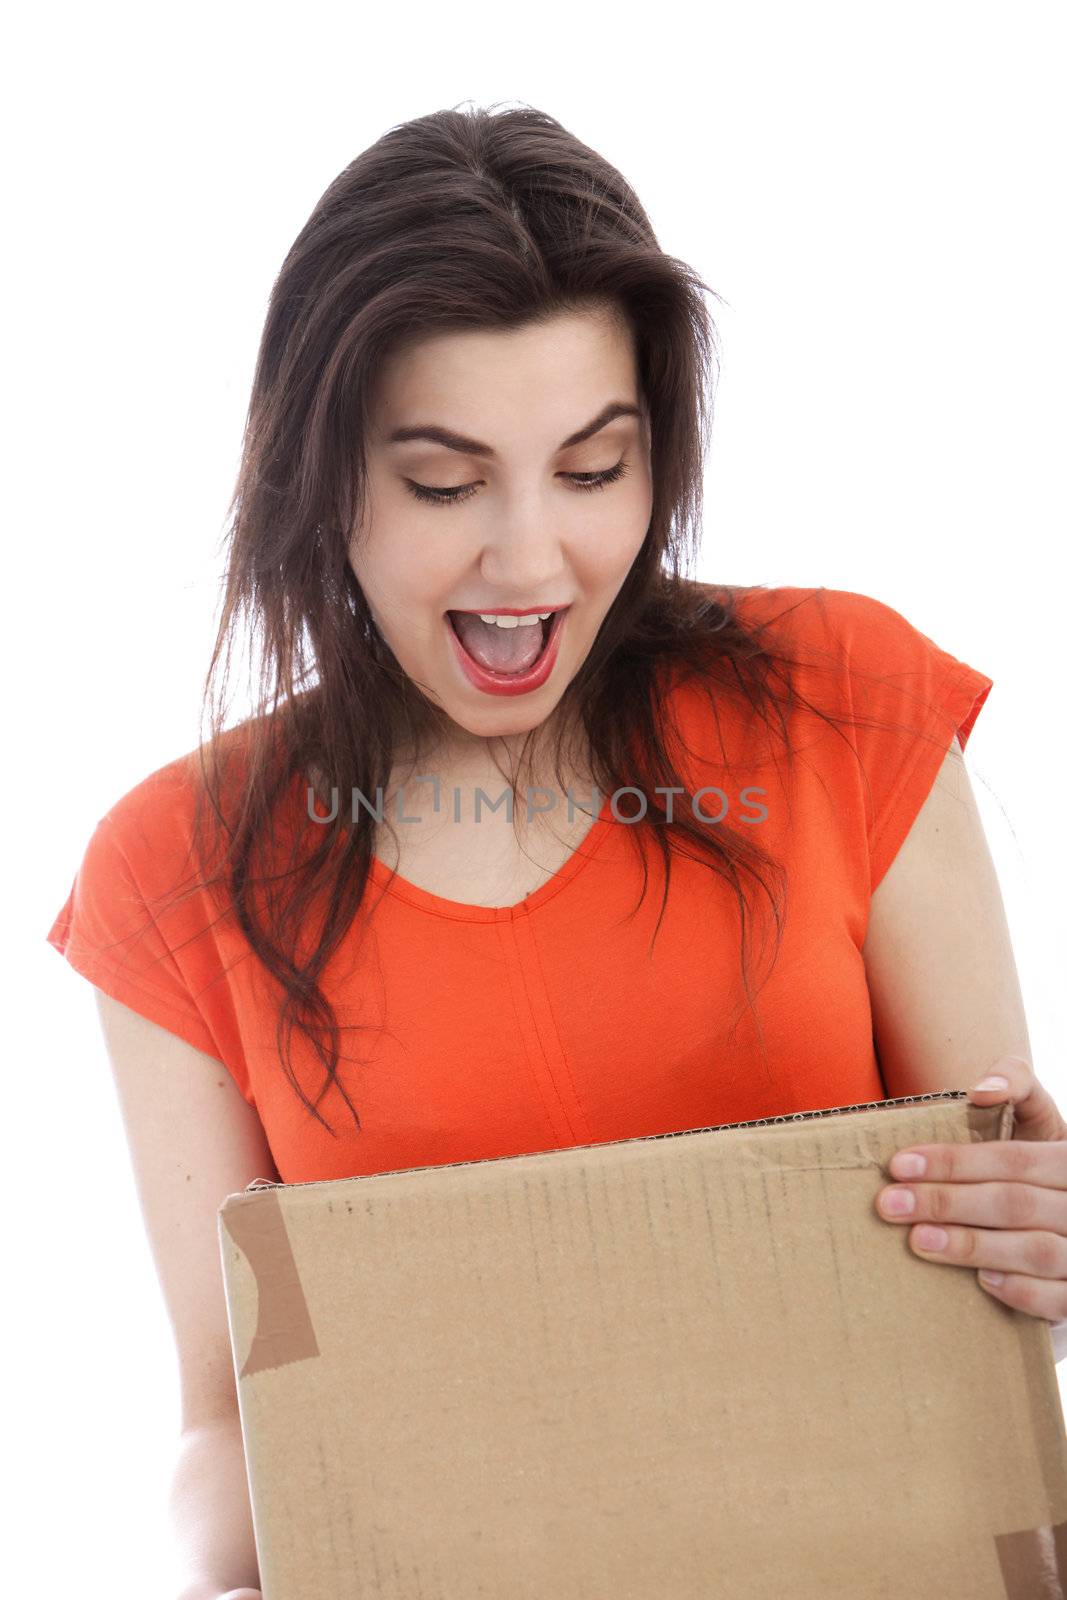 Surprised Caucasian young woman holding a cardboard box, portrait